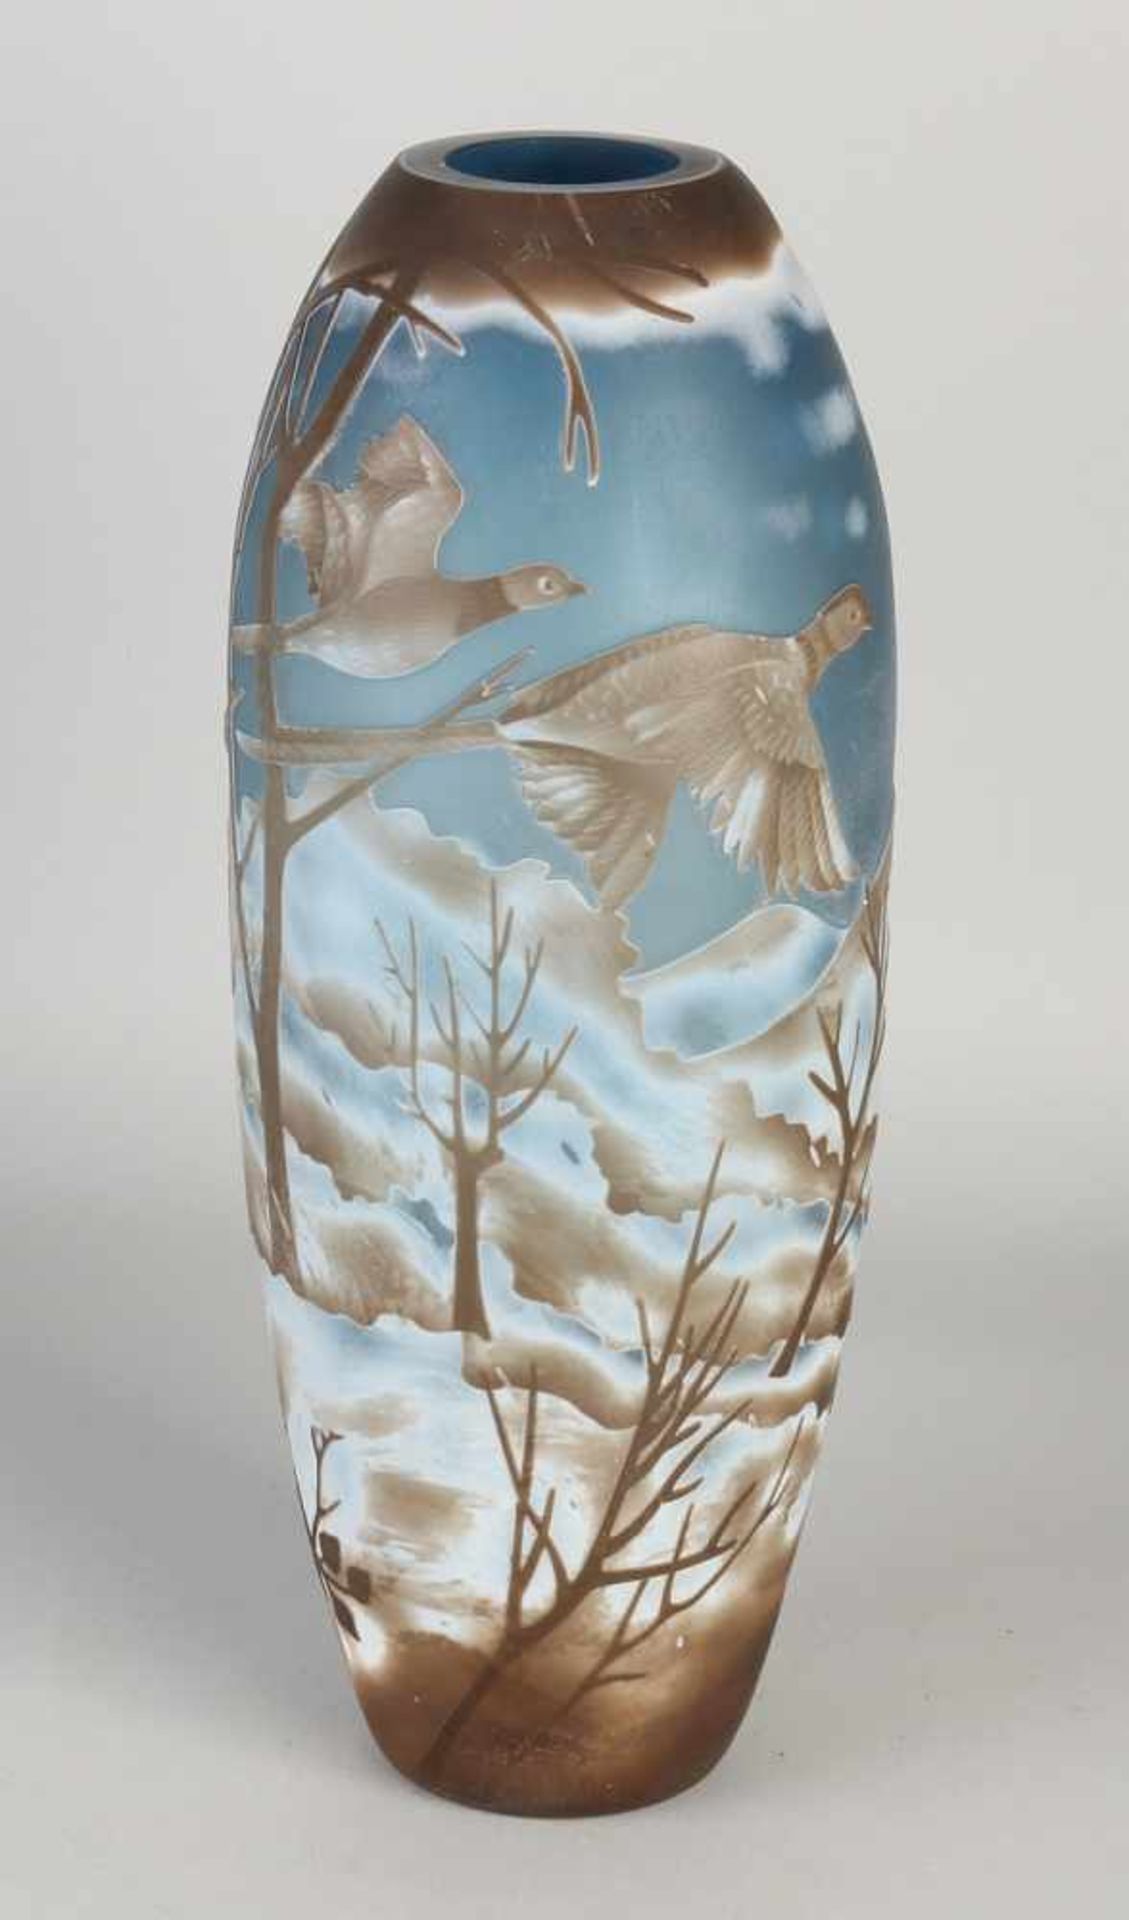 Big Gallé style glass vase with flying doves in landscape. 21st century. Dimensions: 37 cm. In